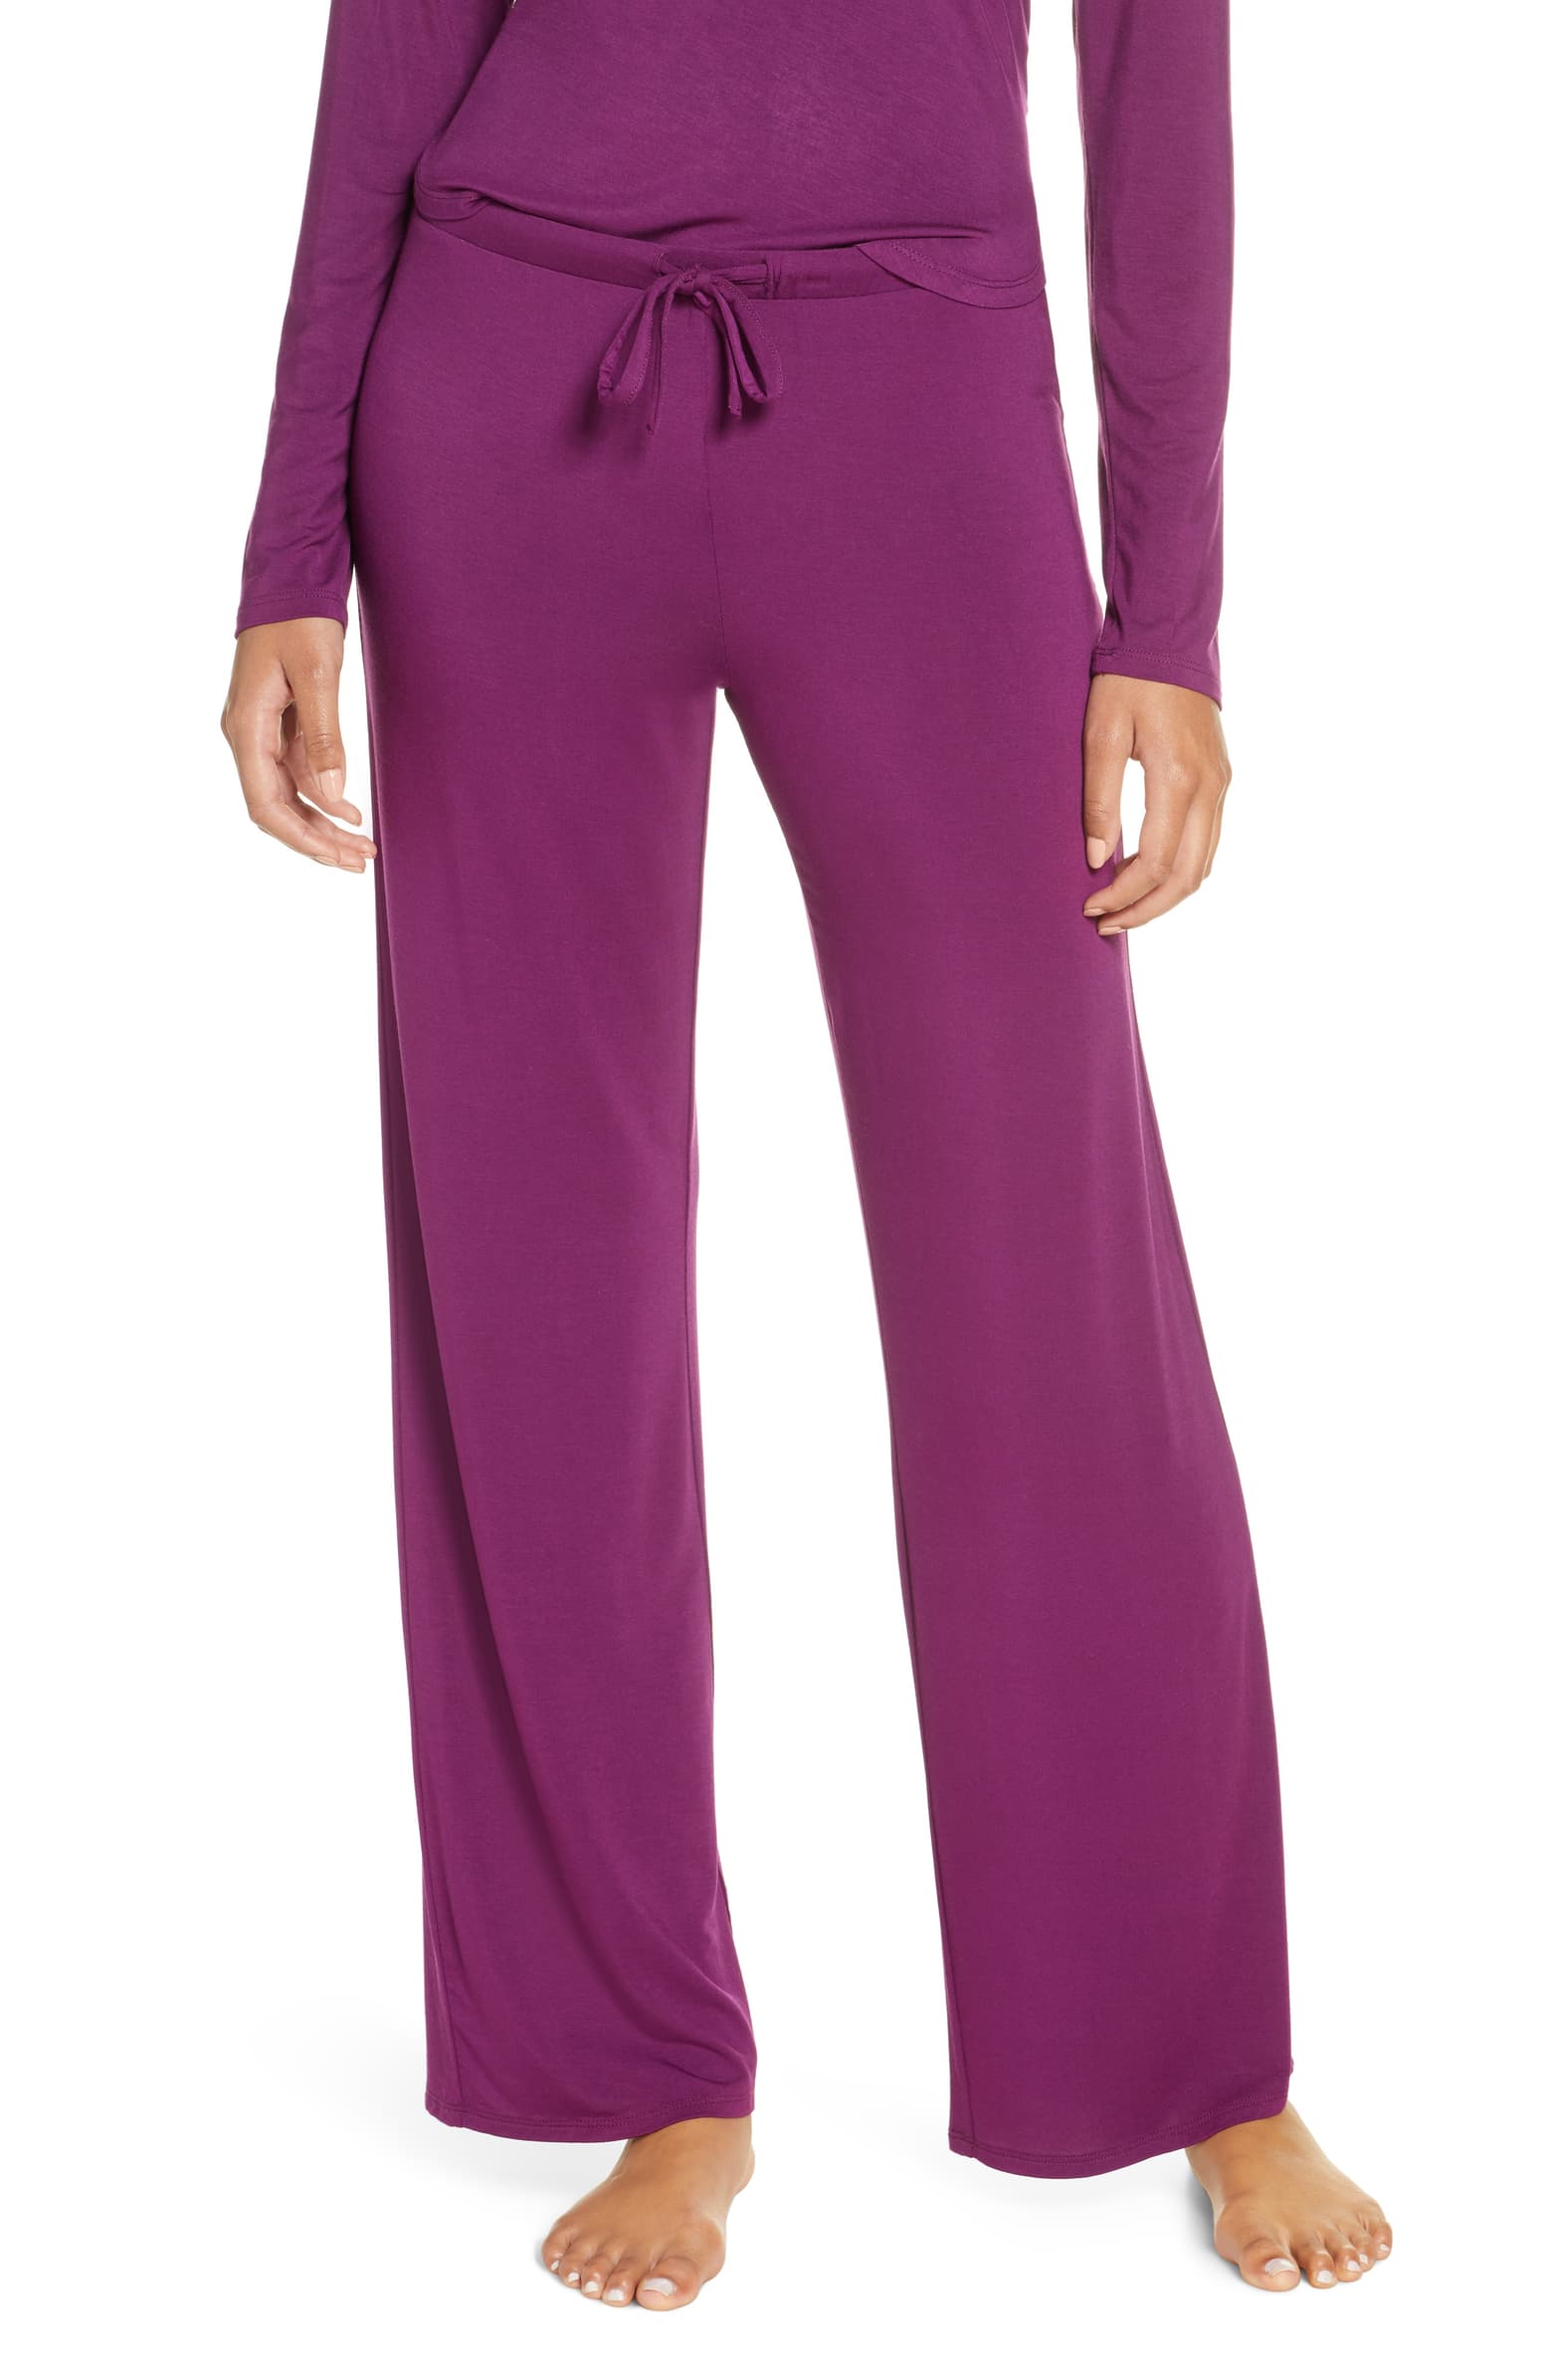 The Softest, Most Comfortable Lounge Pants Are On Sale For Less Than ...